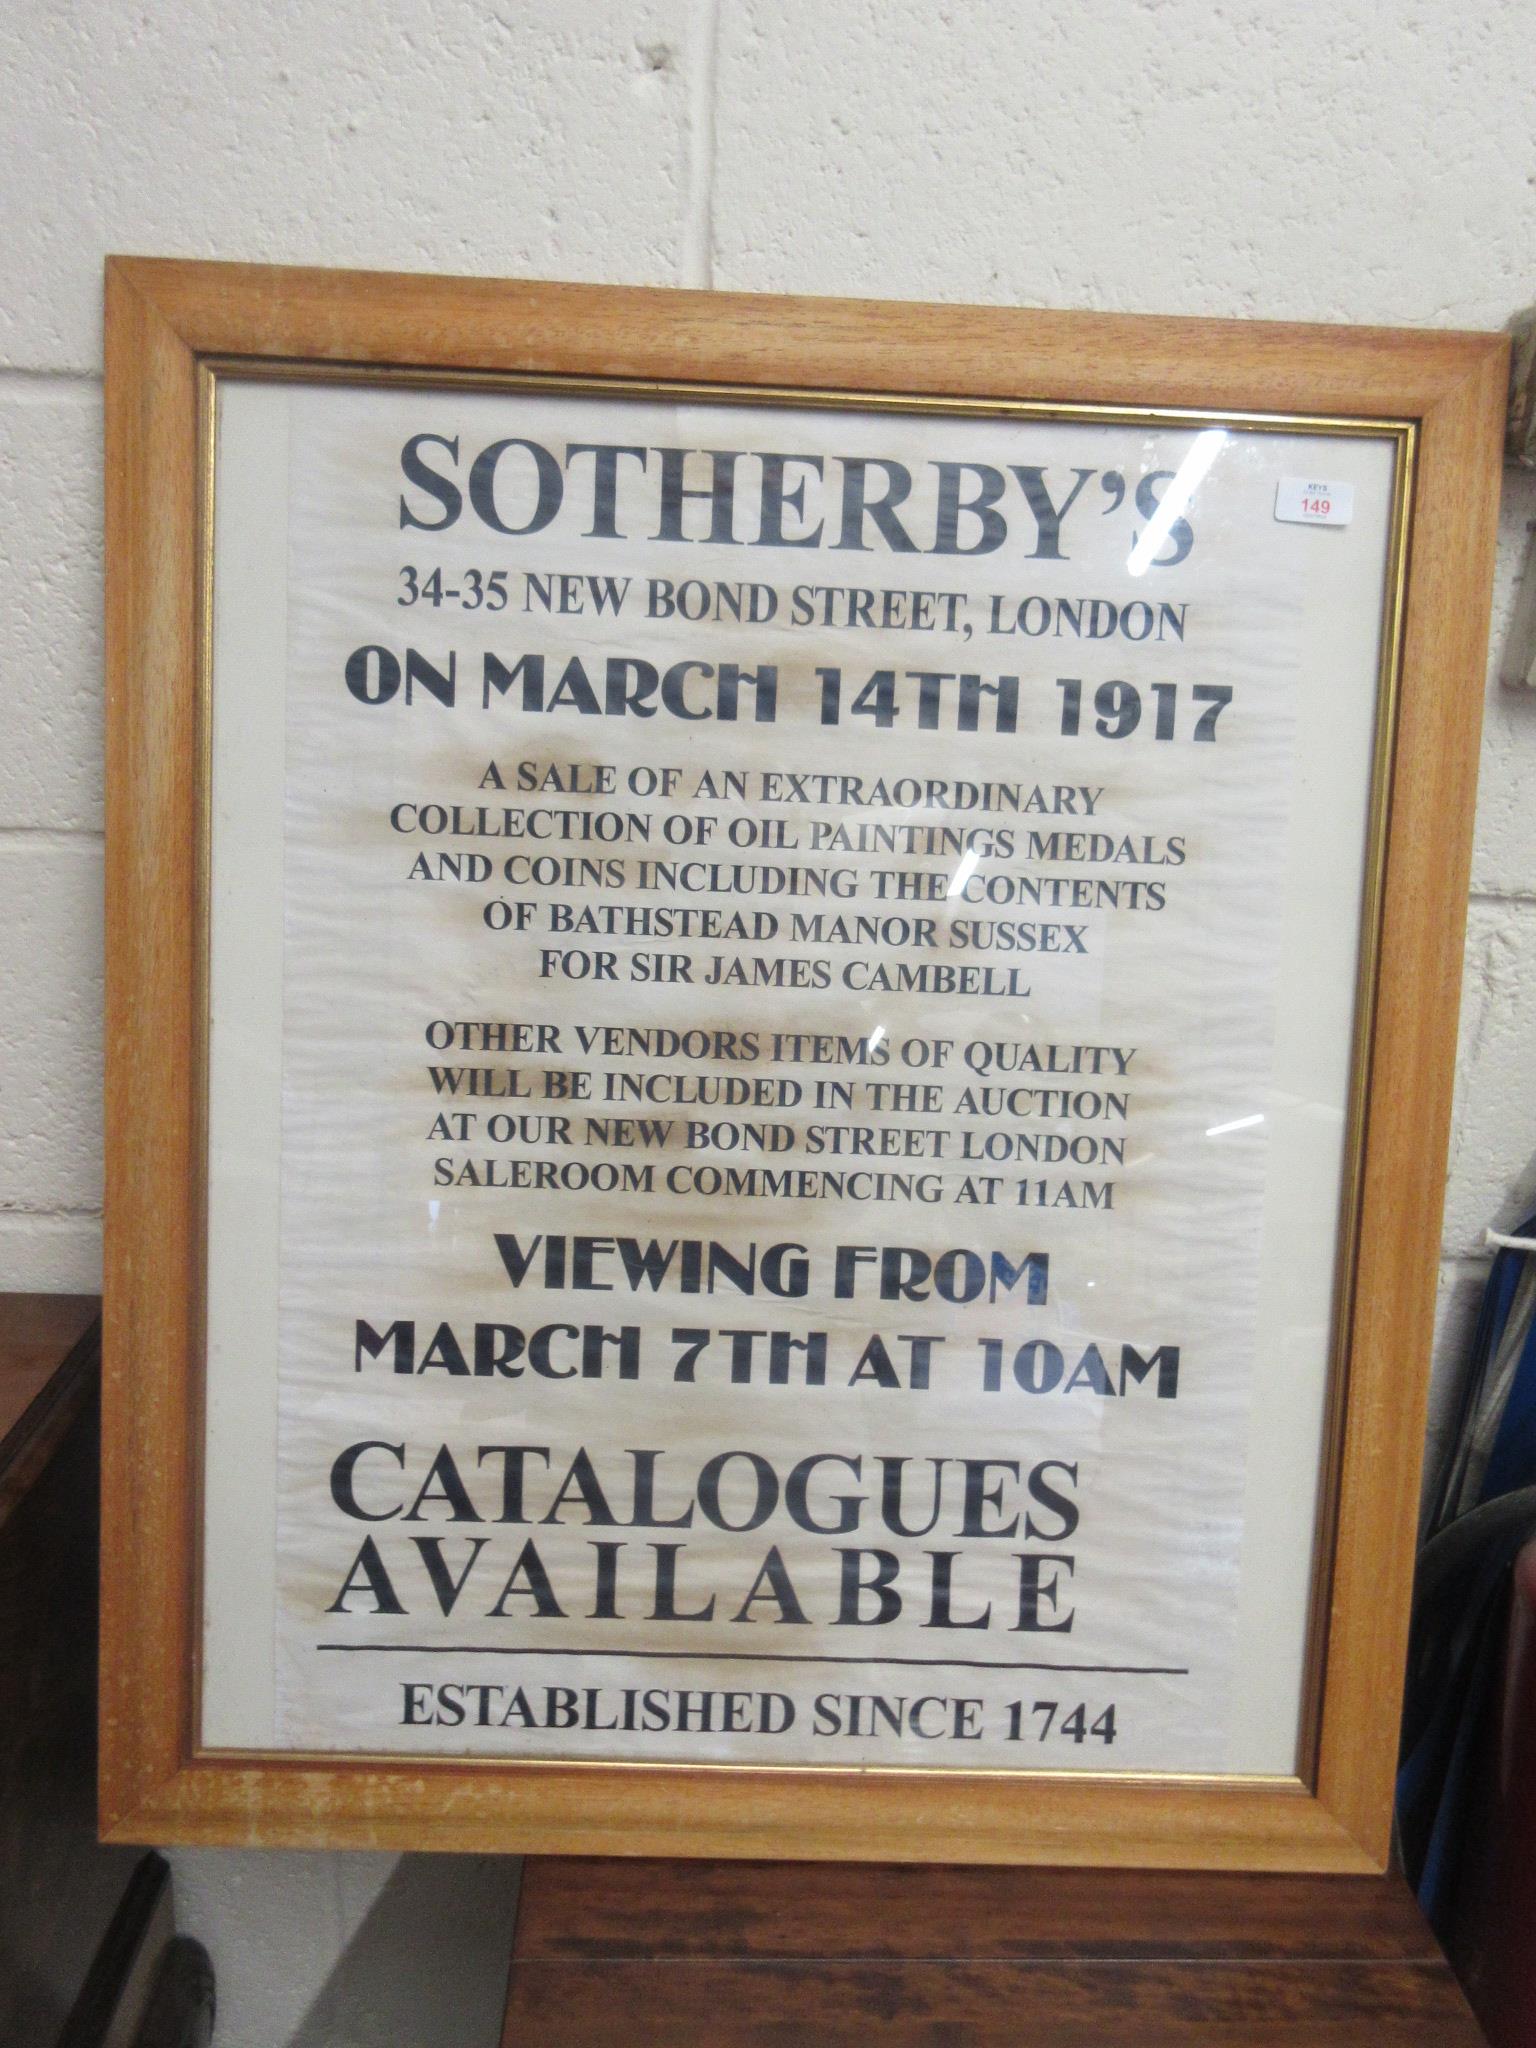 LARGE FRAMED AUCTION POSTER, WIDTH OF FRAME APPROX 69CM